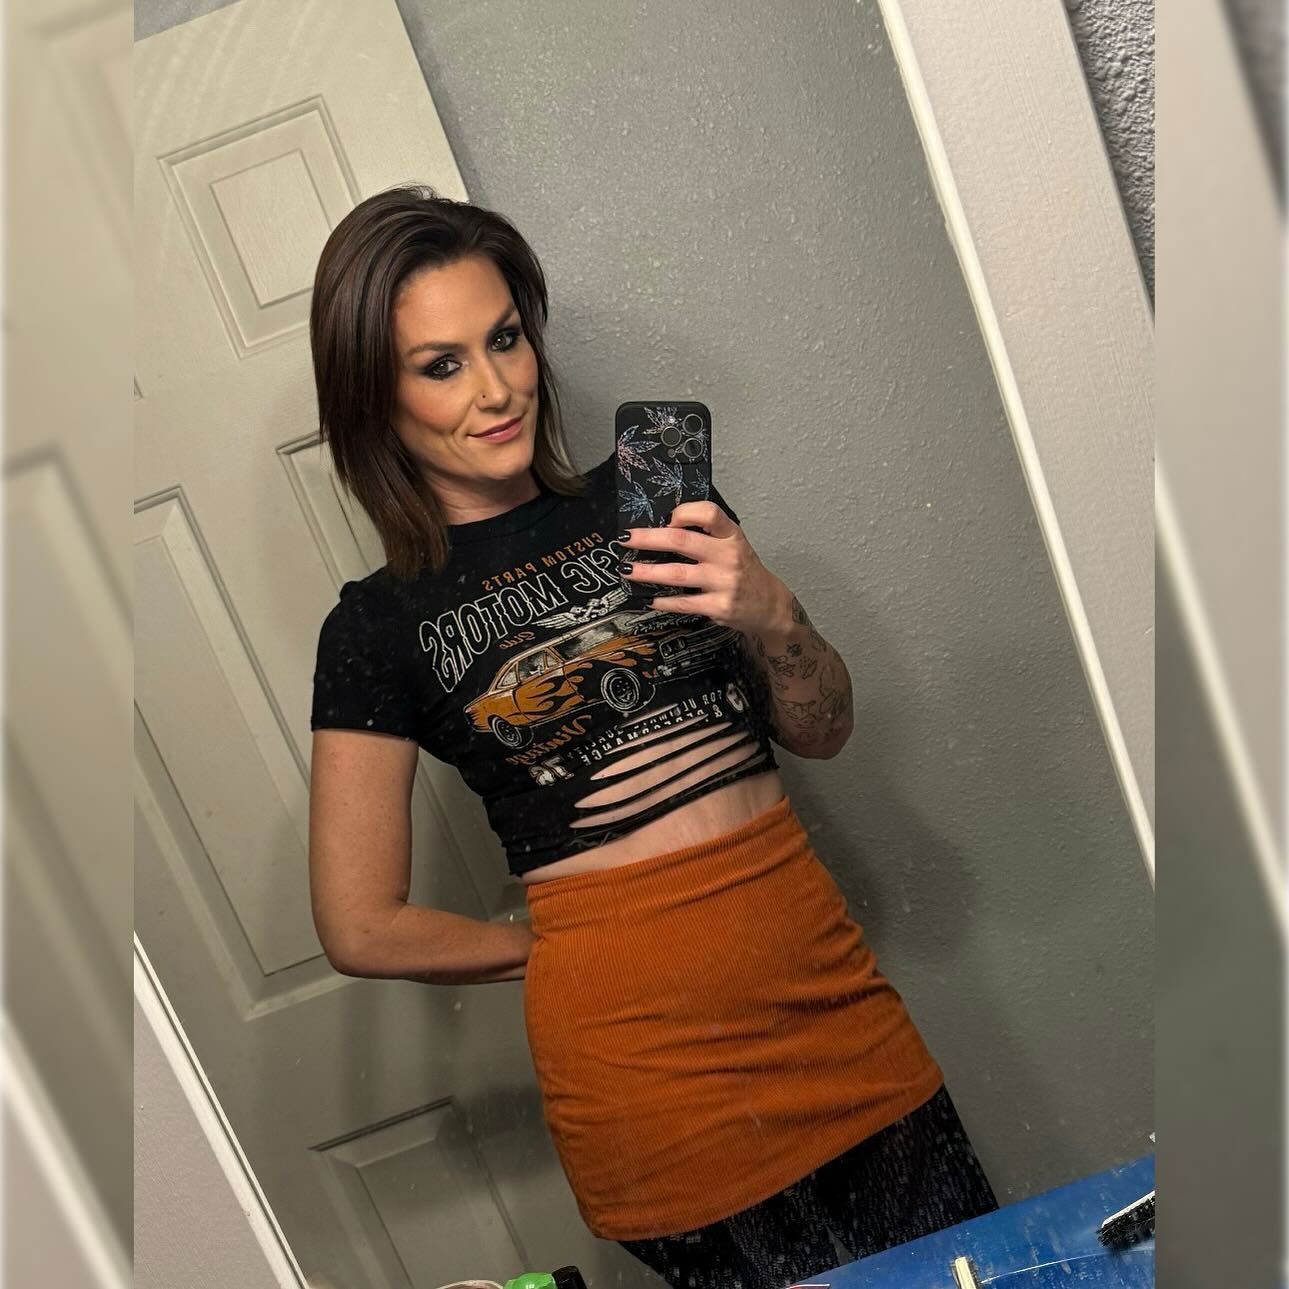 New hair, who dis? 

#newhair #whodis #brunette #haircut #new #different #freckles #dimples #messy #bathroom #mirror #nightout #girlsnight #thursday #drinks #dancing #arizona #tucson #nightlife #outfit #ootd #manicure #nails #makeup #tattoo #tattoosleeve #sticker